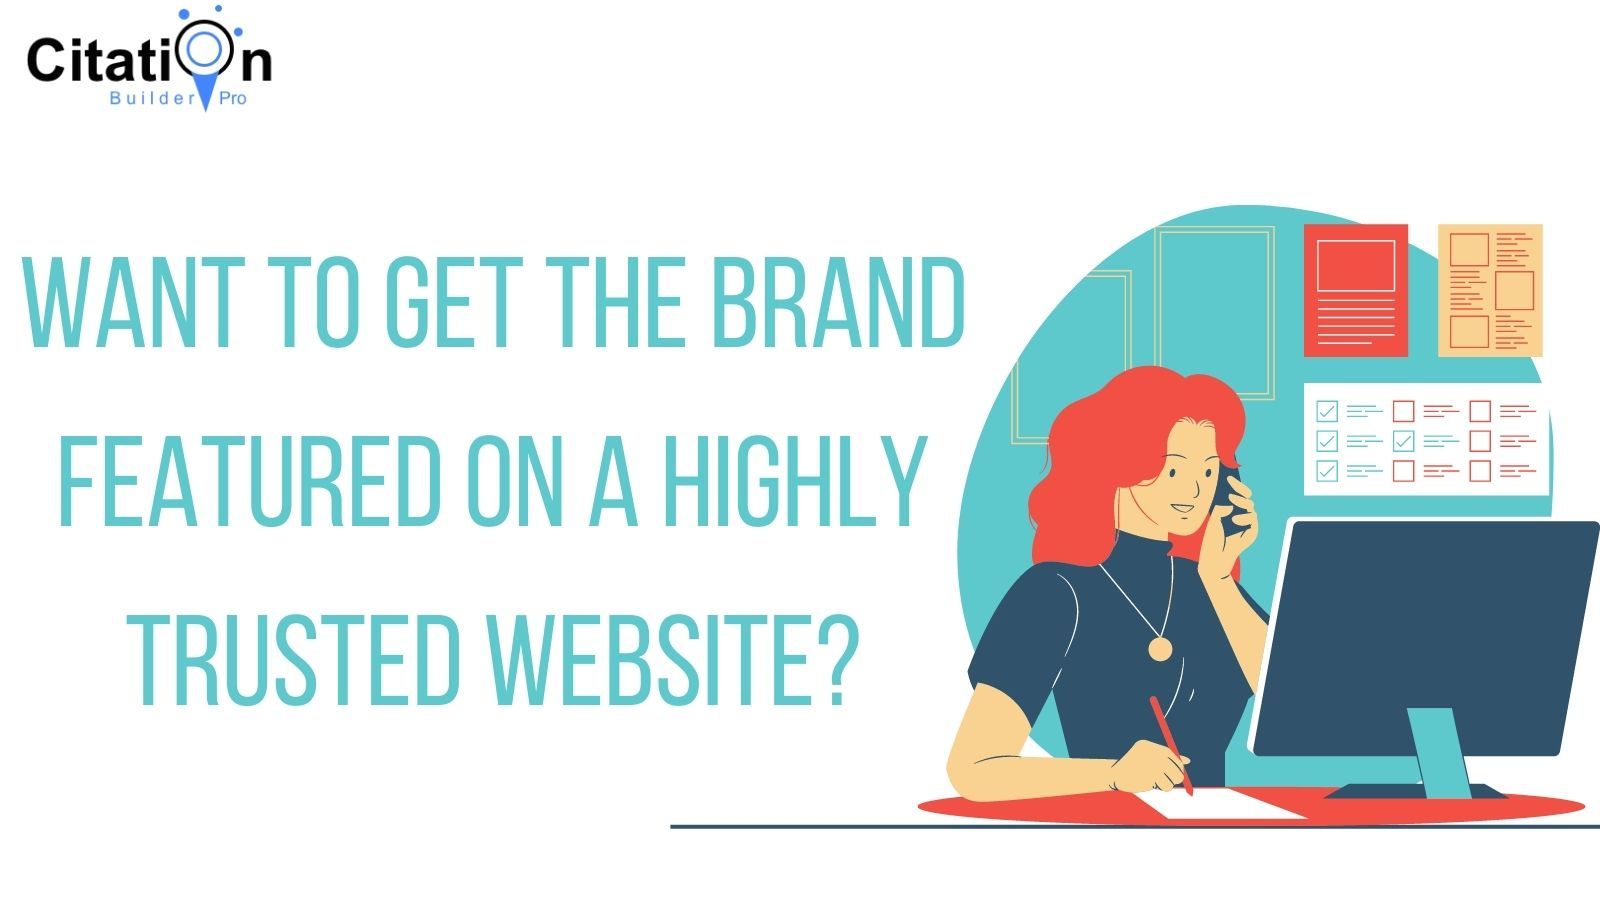 Want to Get the Brand Featured on a Highly Trusted Website